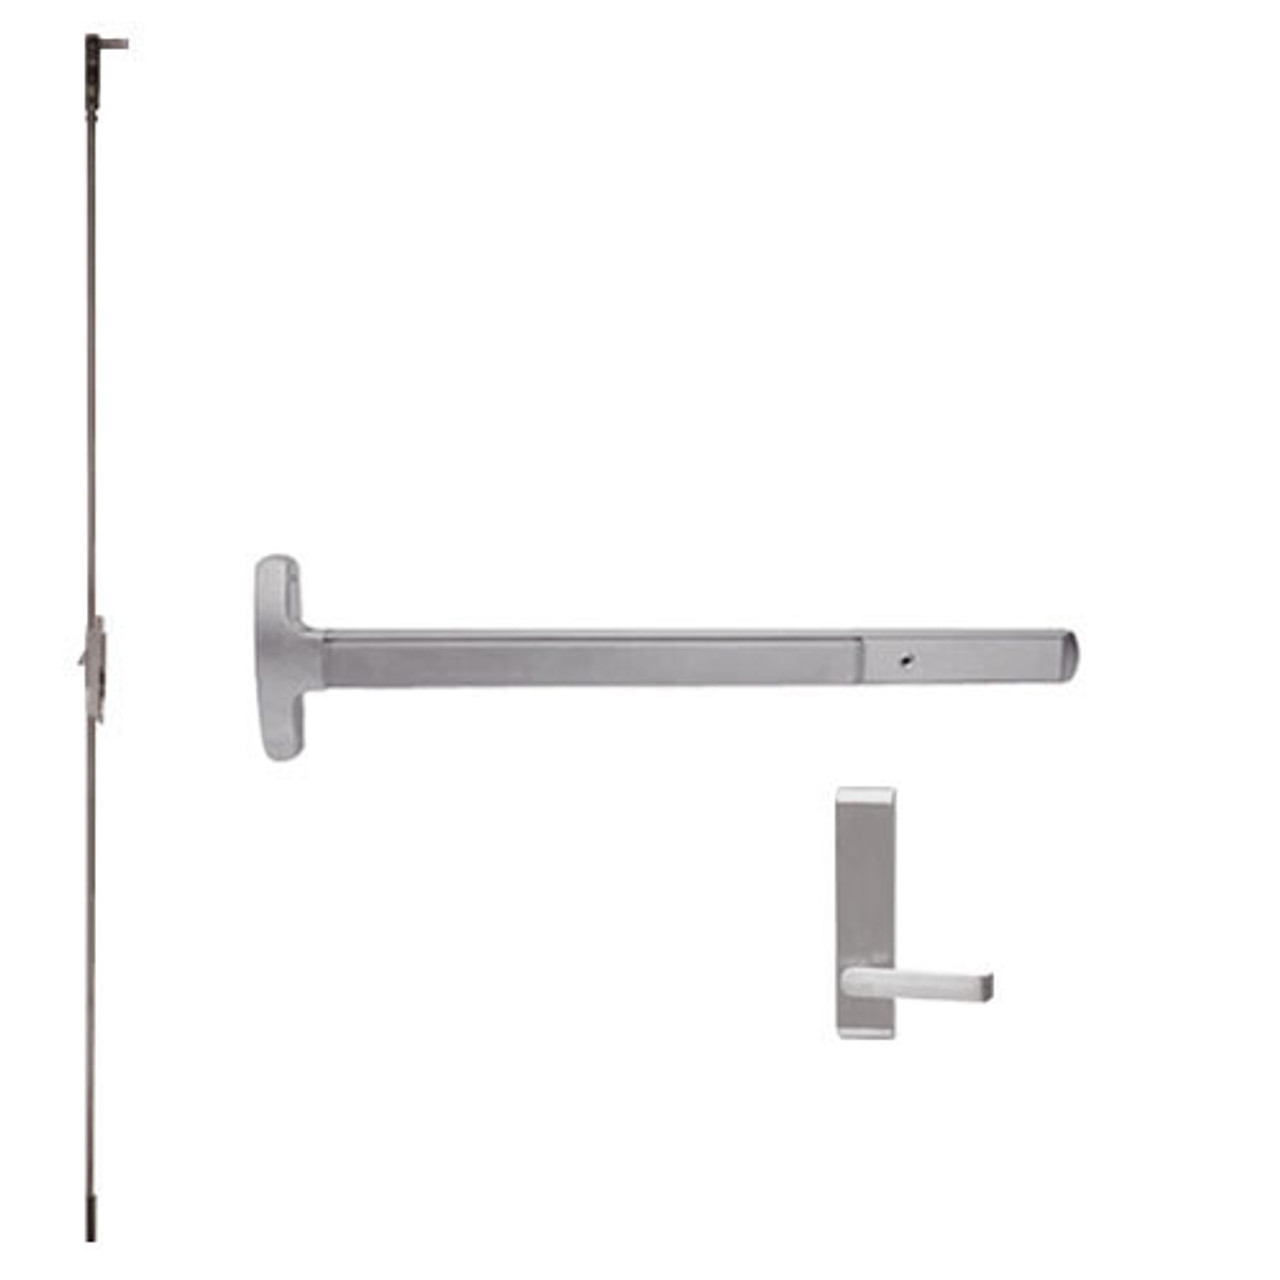 24-C-L-DT-DANE-US32D-3-LHR Falcon Exit Device in Satin Stainless Steel